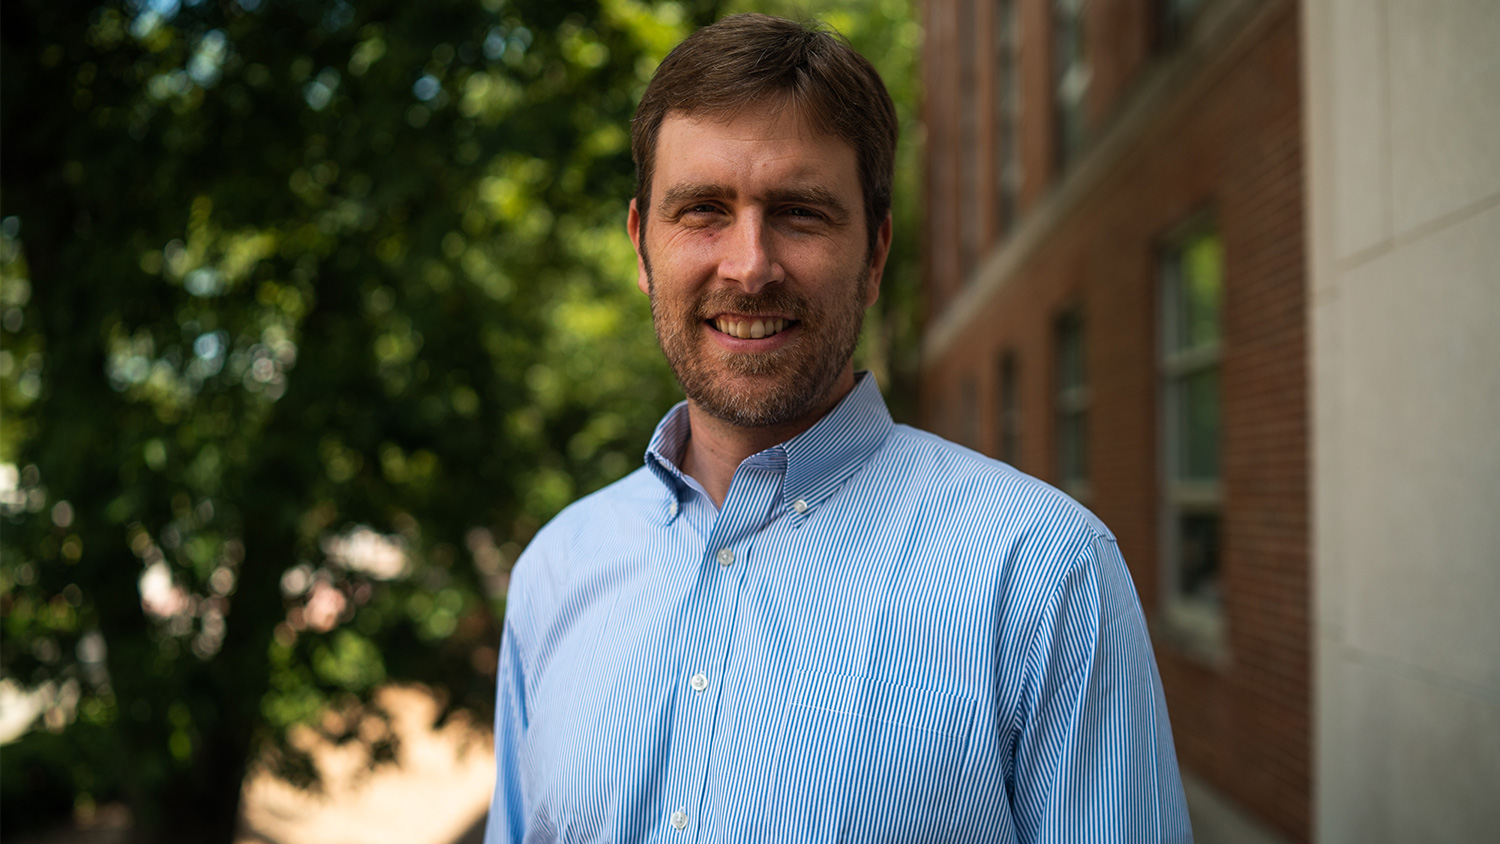 Tim Kraft, assistant professor of operations and supply chain management